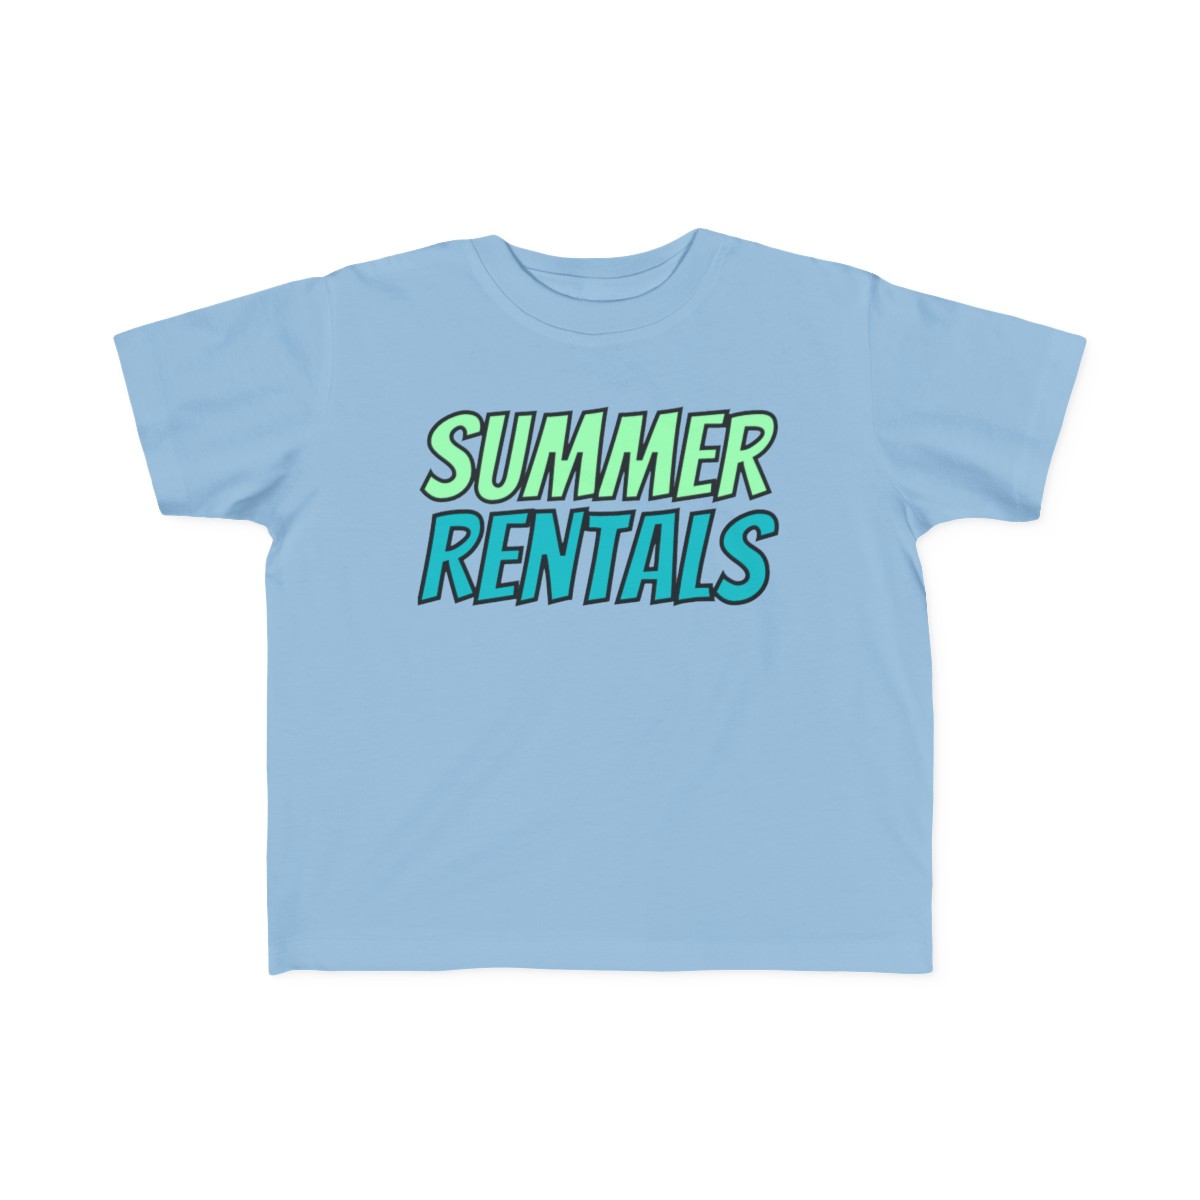 Toddlers T product thumbnail image